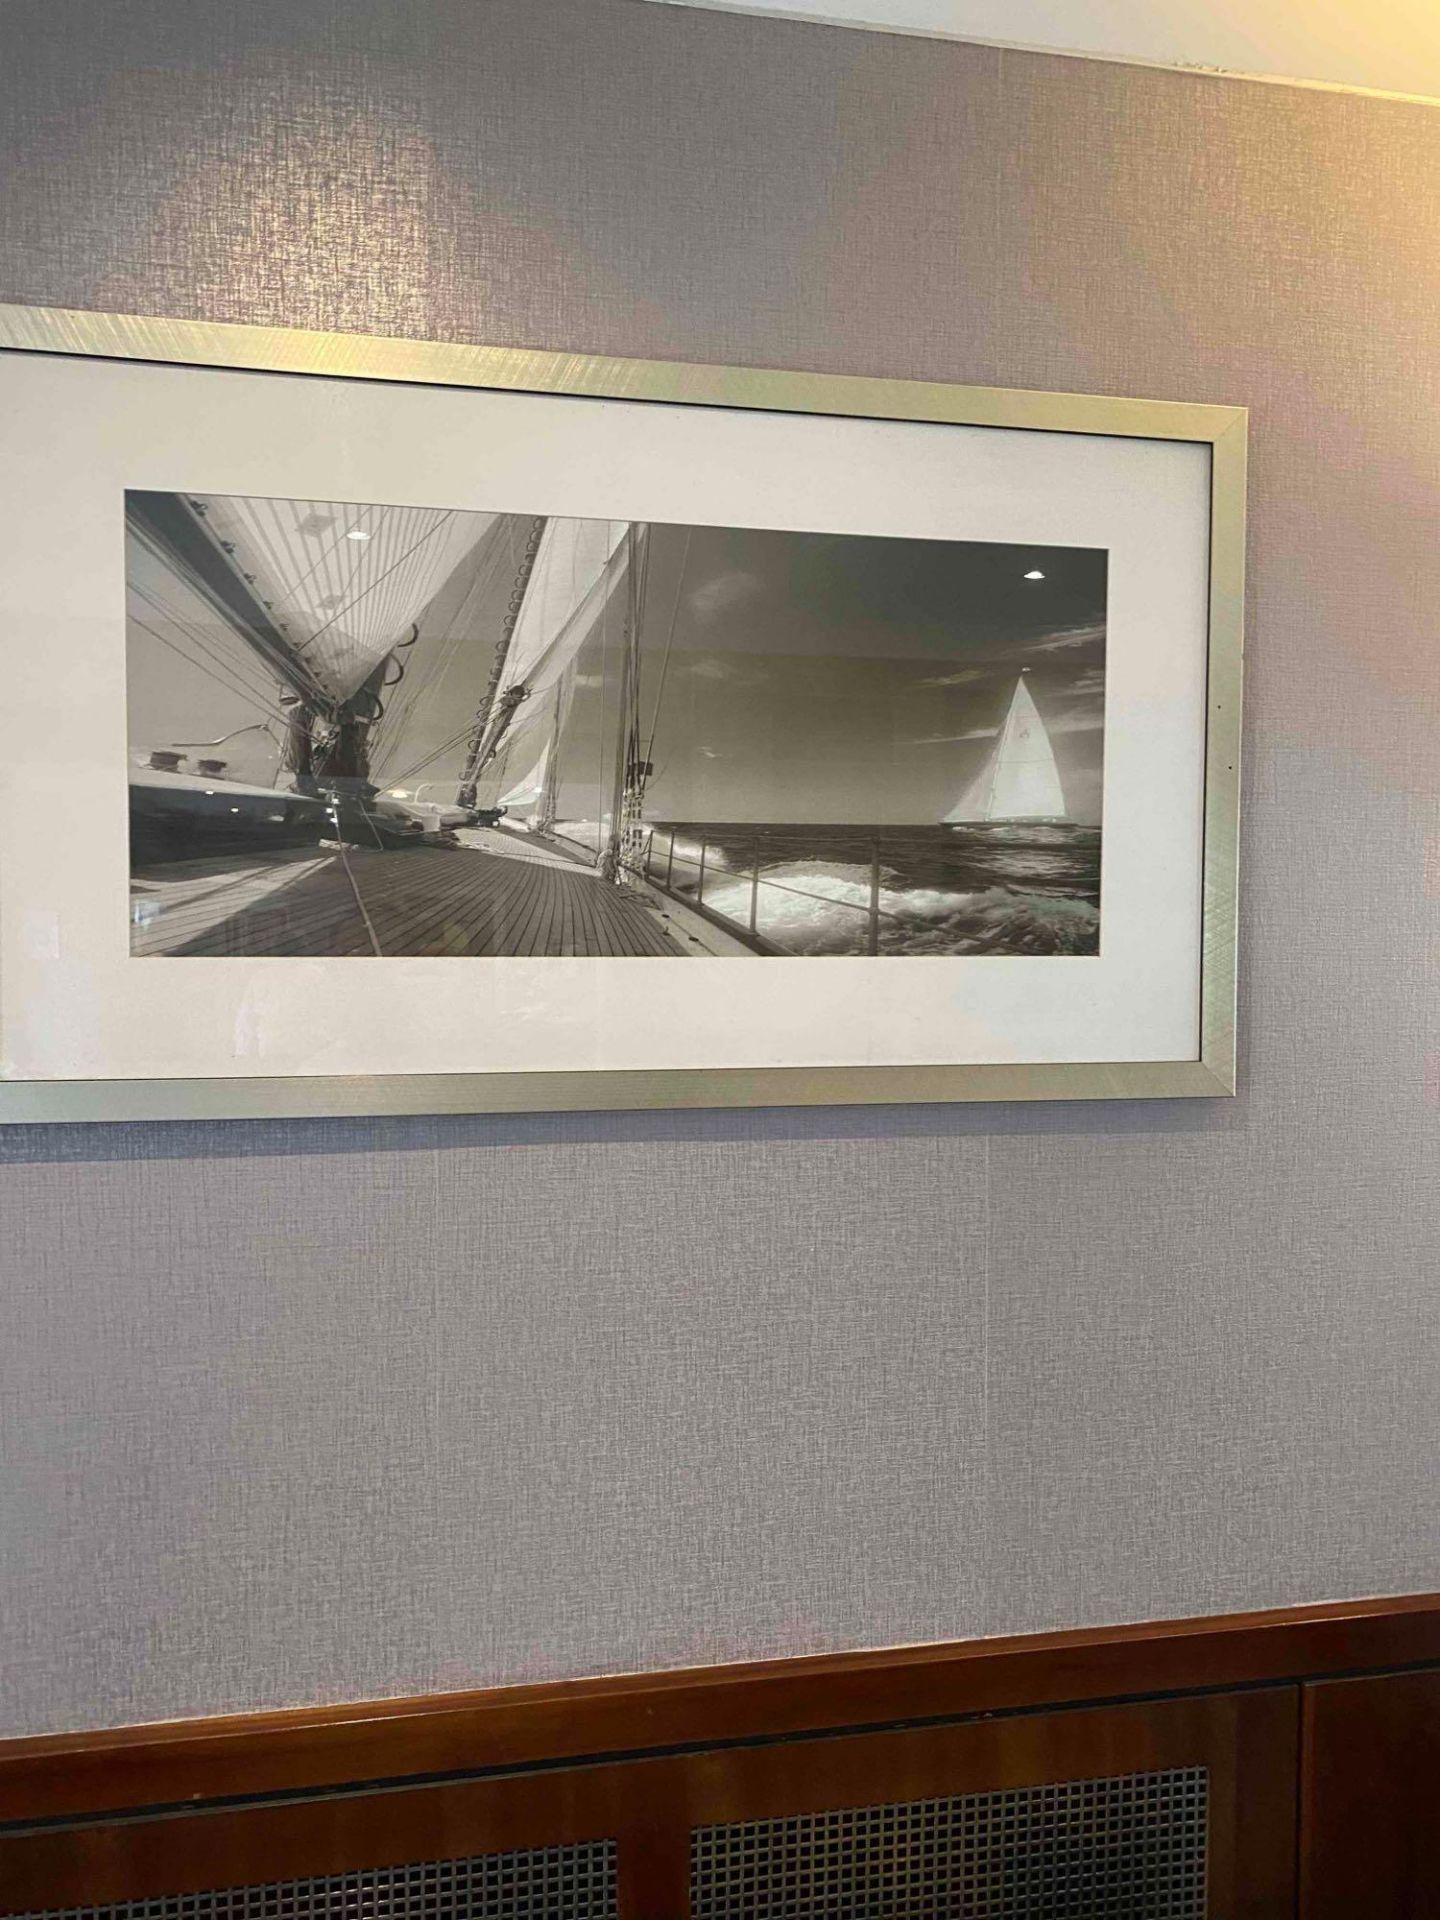 Silver Framed , Print In Frame Of Racing Yacht 685 x 1192 (The Lounge ) - Image 2 of 2